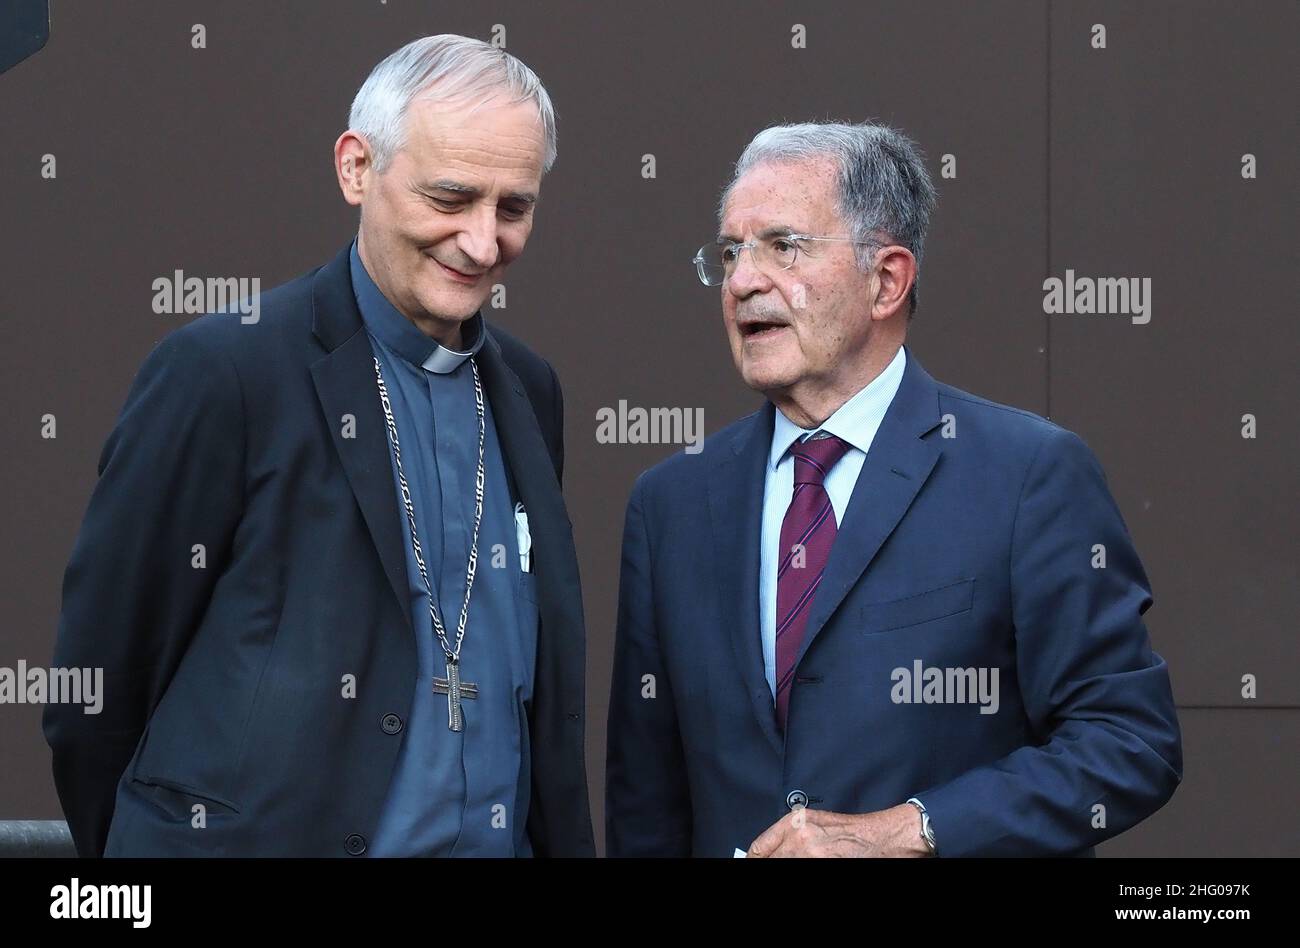 Michele Nucci/LaPresse July 9, 2021 - Bologna, Italy - news in the pic: As part of the &quot;Republic of Ideas&quot; review, a public meeting with Romano Prodi and Cardinal of Bologna Matteo Zuppi entitled &quot;Governing the Polis&quot; Stock Photo